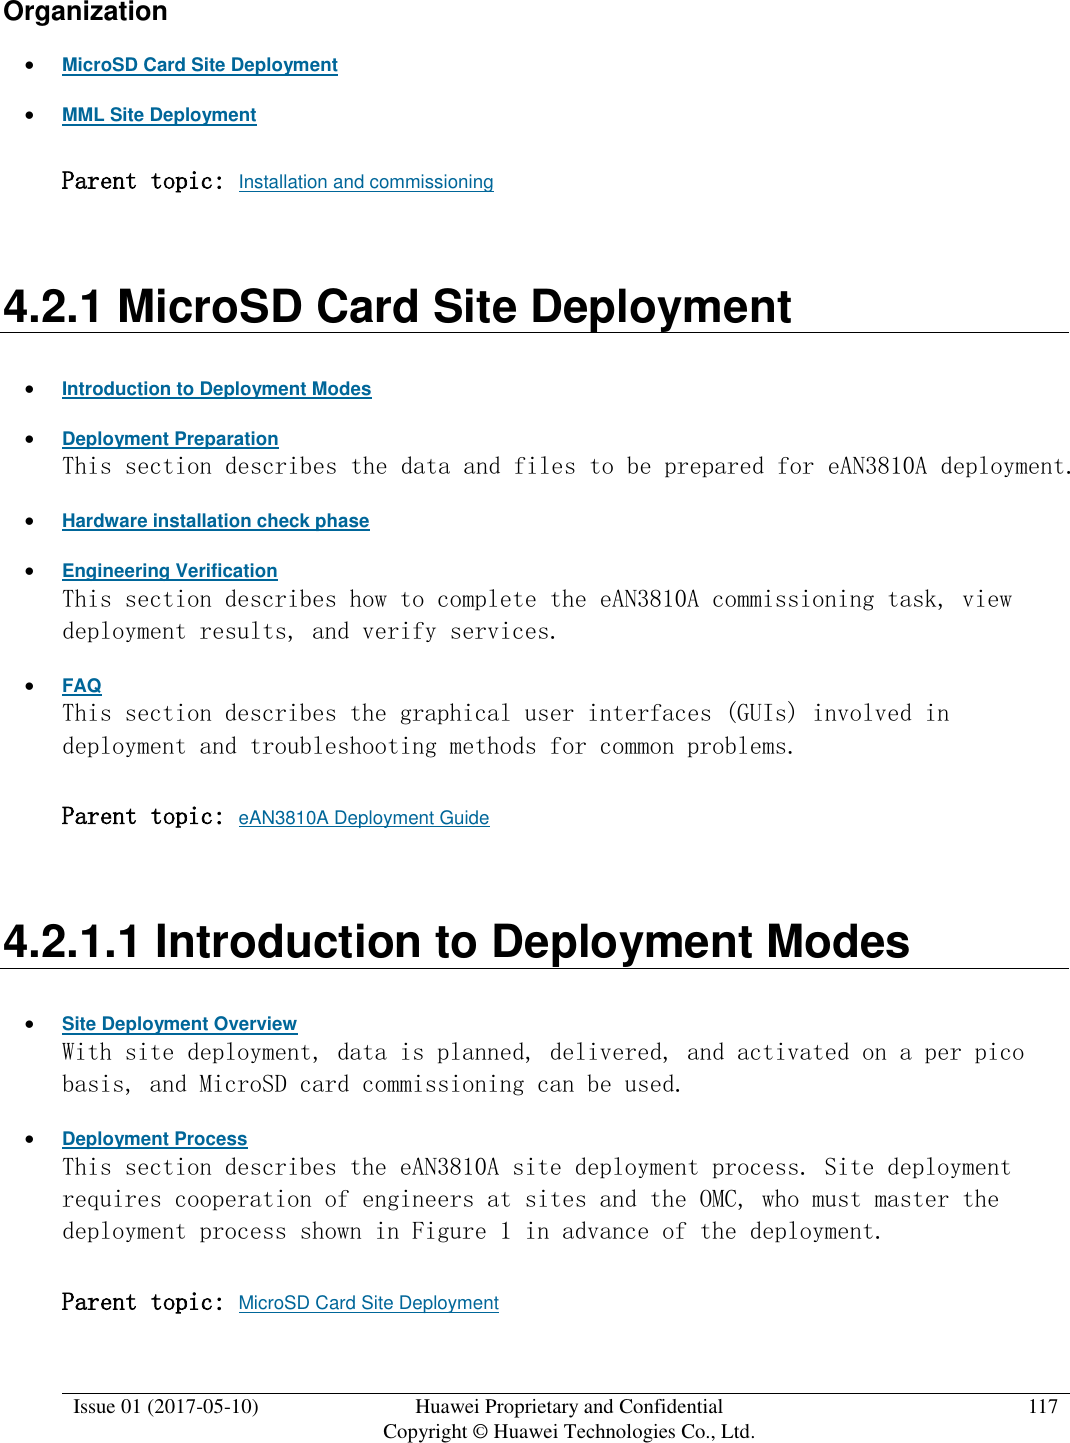  Issue 01 (2017-05-10) Huawei Proprietary and Confidential      Copyright © Huawei Technologies Co., Ltd. 117  Organization  MicroSD Card Site Deployment  MML Site Deployment Parent topic: Installation and commissioning 4.2.1 MicroSD Card Site Deployment  Introduction to Deployment Modes  Deployment Preparation This section describes the data and files to be prepared for eAN3810A deployment.   Hardware installation check phase  Engineering Verification This section describes how to complete the eAN3810A commissioning task, view deployment results, and verify services.   FAQ This section describes the graphical user interfaces (GUIs) involved in deployment and troubleshooting methods for common problems.  Parent topic: eAN3810A Deployment Guide 4.2.1.1 Introduction to Deployment Modes  Site Deployment Overview With site deployment, data is planned, delivered, and activated on a per pico basis, and MicroSD card commissioning can be used.   Deployment Process This section describes the eAN3810A site deployment process. Site deployment requires cooperation of engineers at sites and the OMC, who must master the deployment process shown in Figure 1 in advance of the deployment.  Parent topic: MicroSD Card Site Deployment 